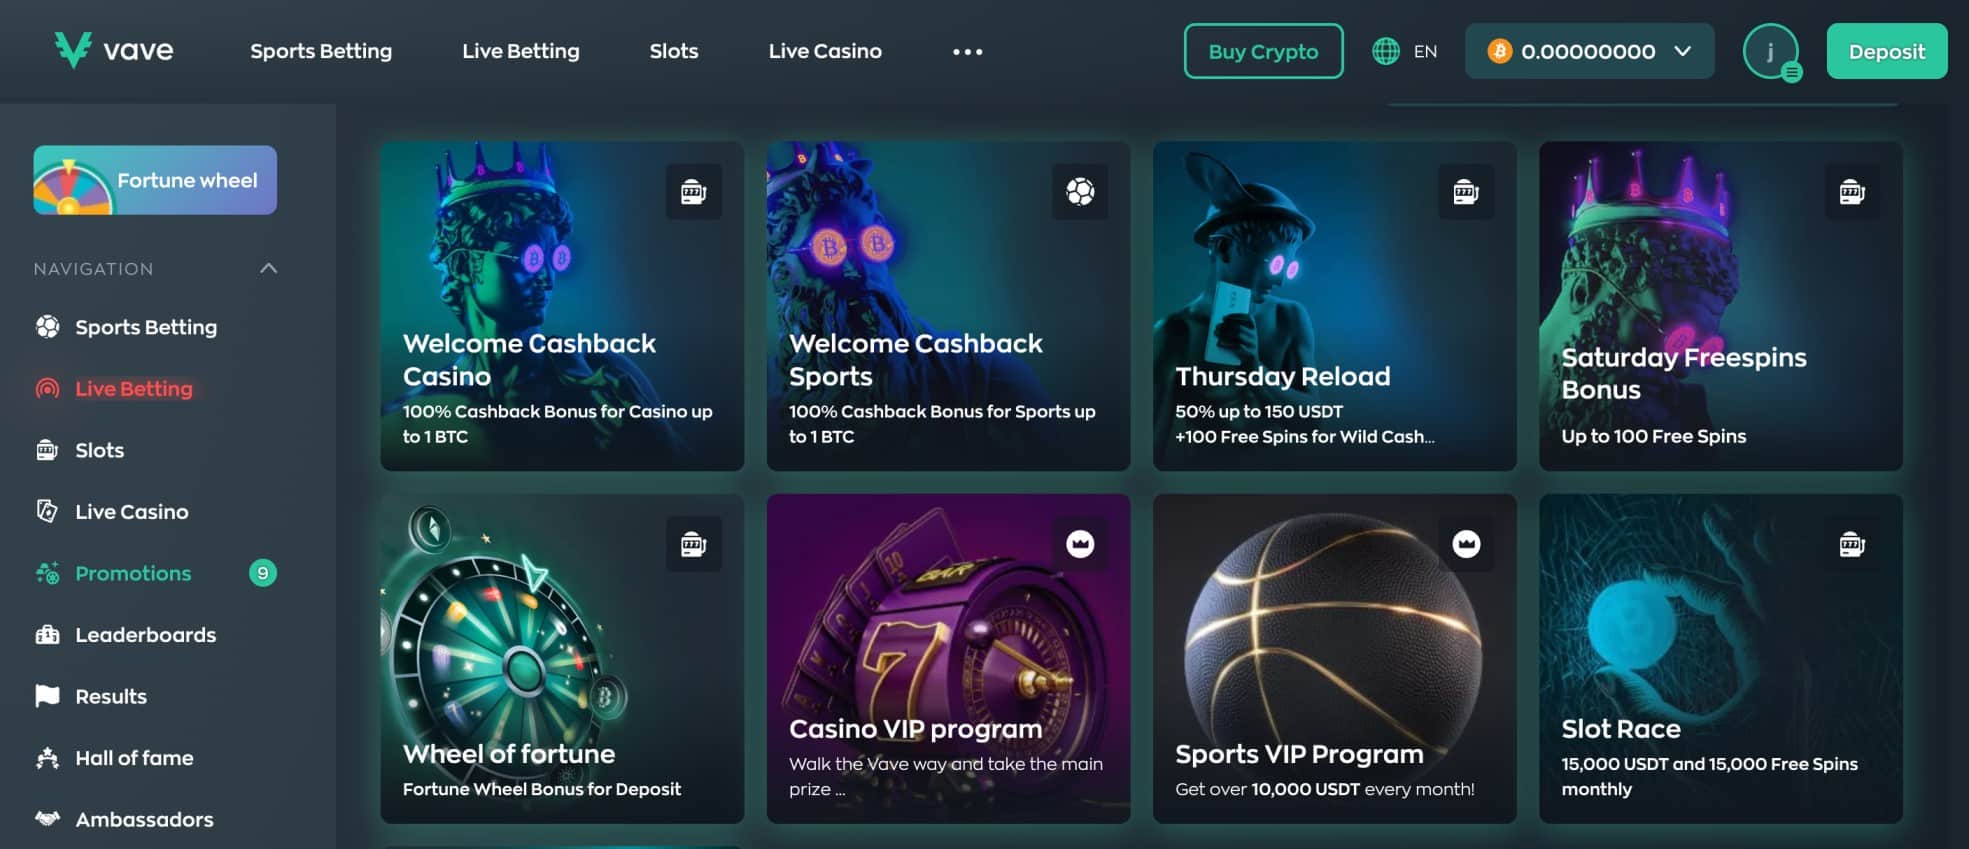 Vave casino review 